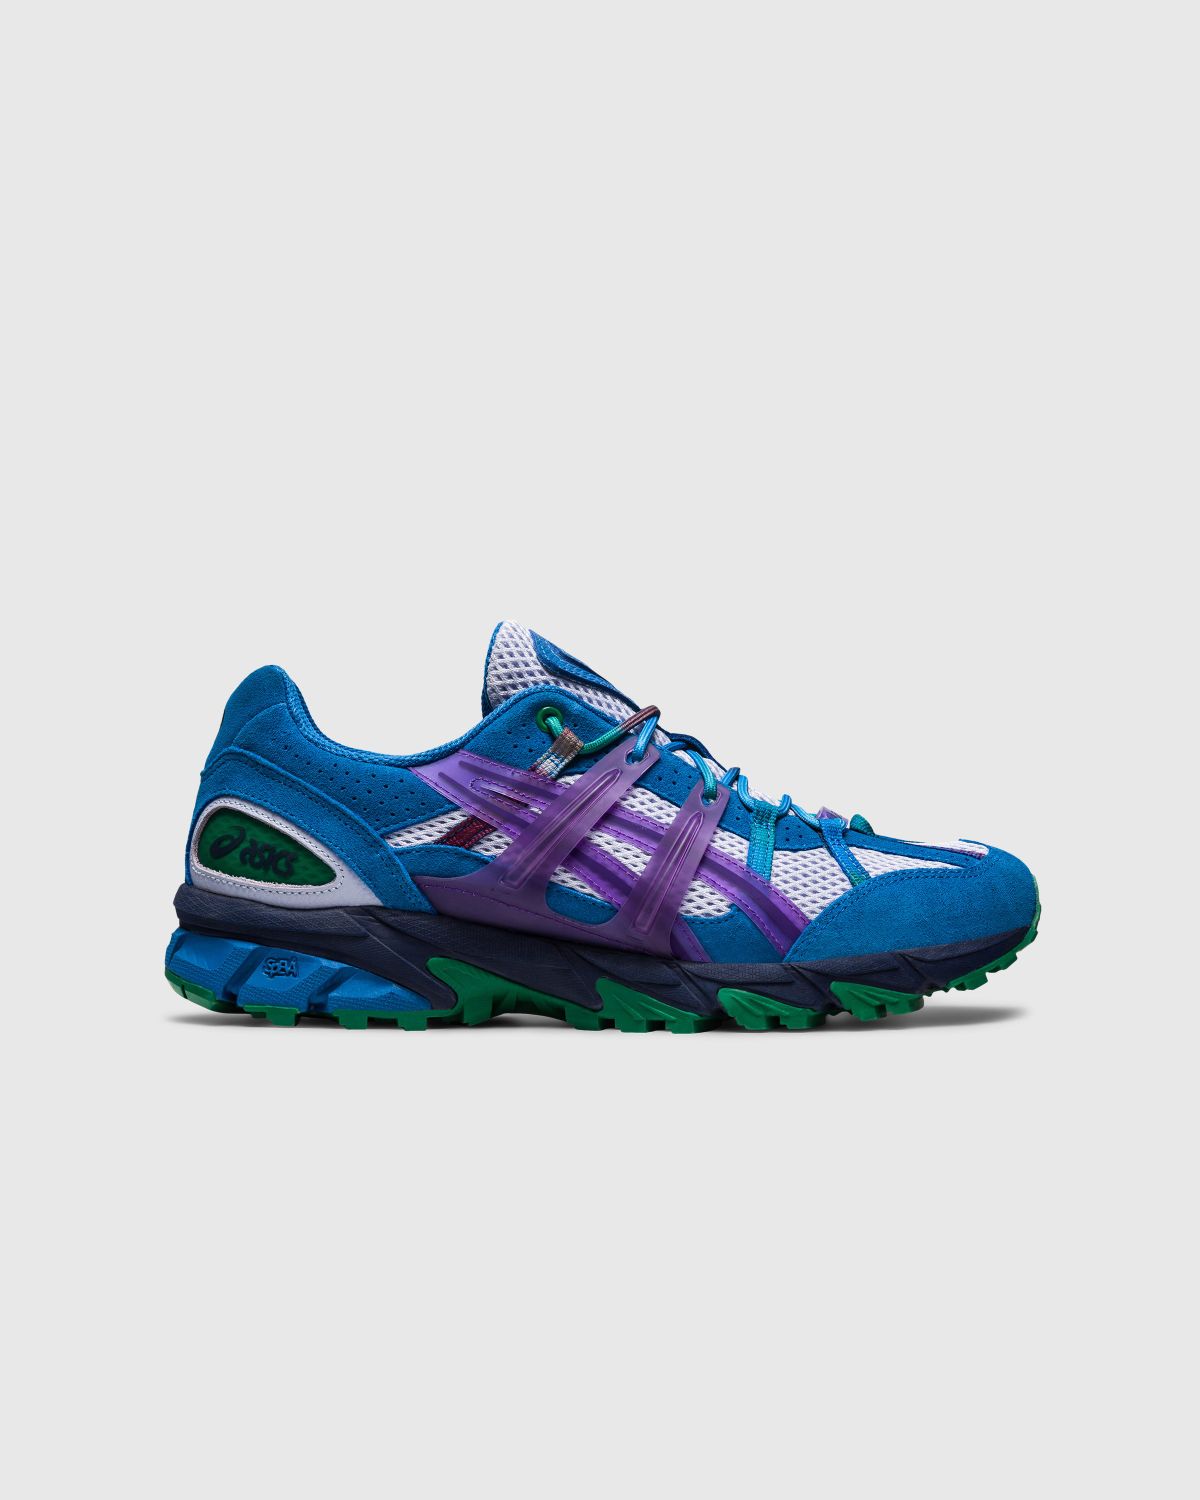 asics x A.P.C. – GEL-SONOMA 15-50 Lilac Opal/Gentry Purple - Low Top Sneakers - Purple - Image 1